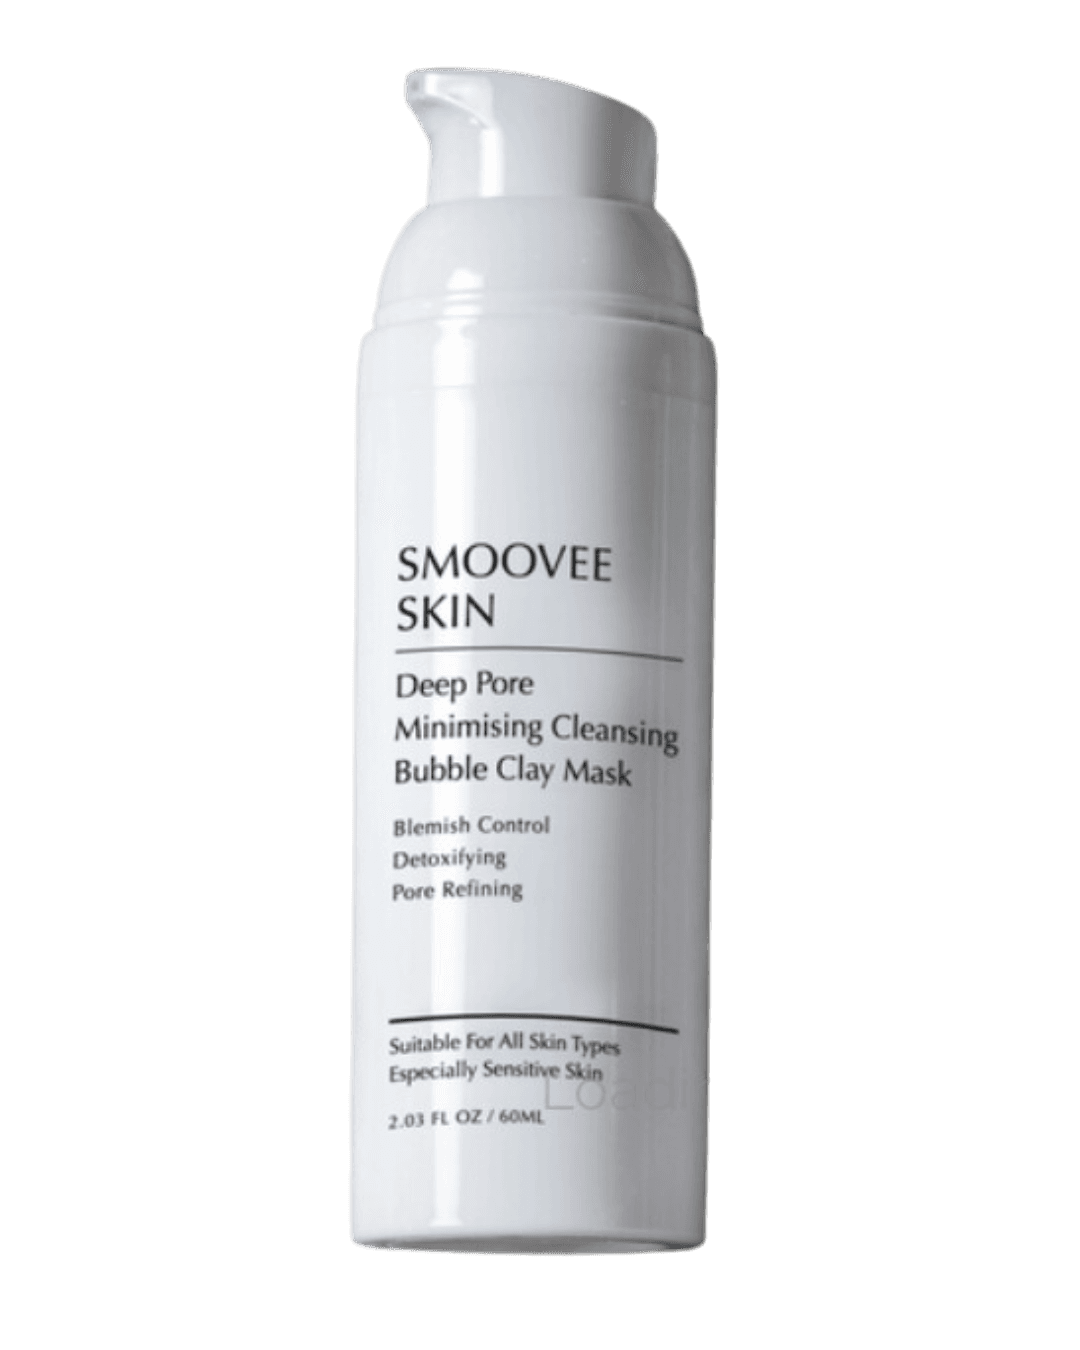 Smoovee Skin Skin Deep Pore Minimising Cleansing Bubble Clay Mask